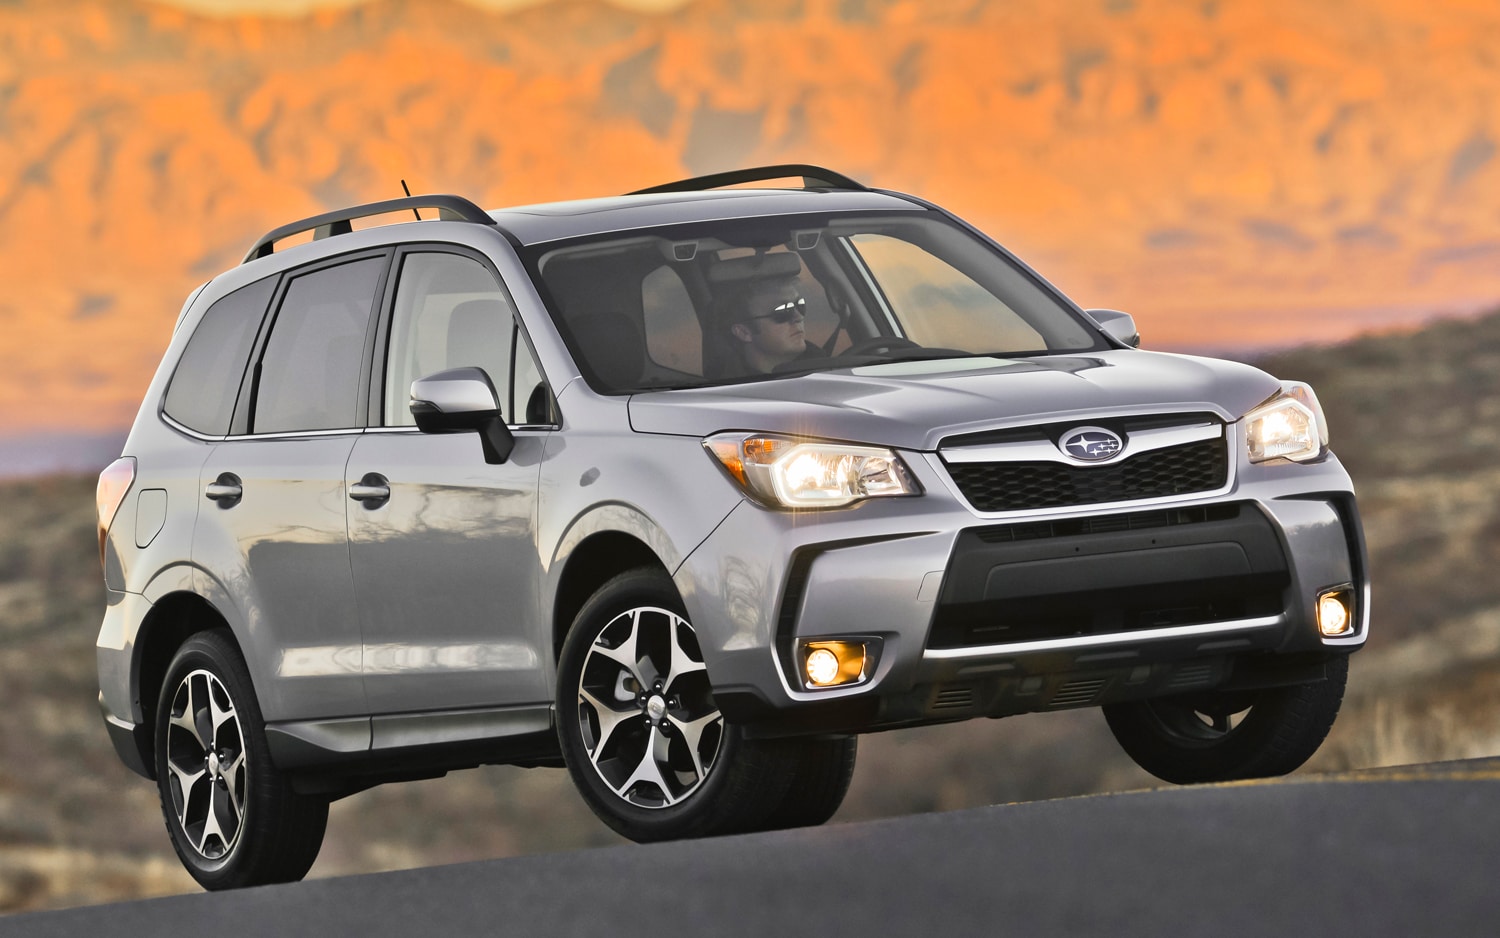 2014 Subaru Forester First Drive